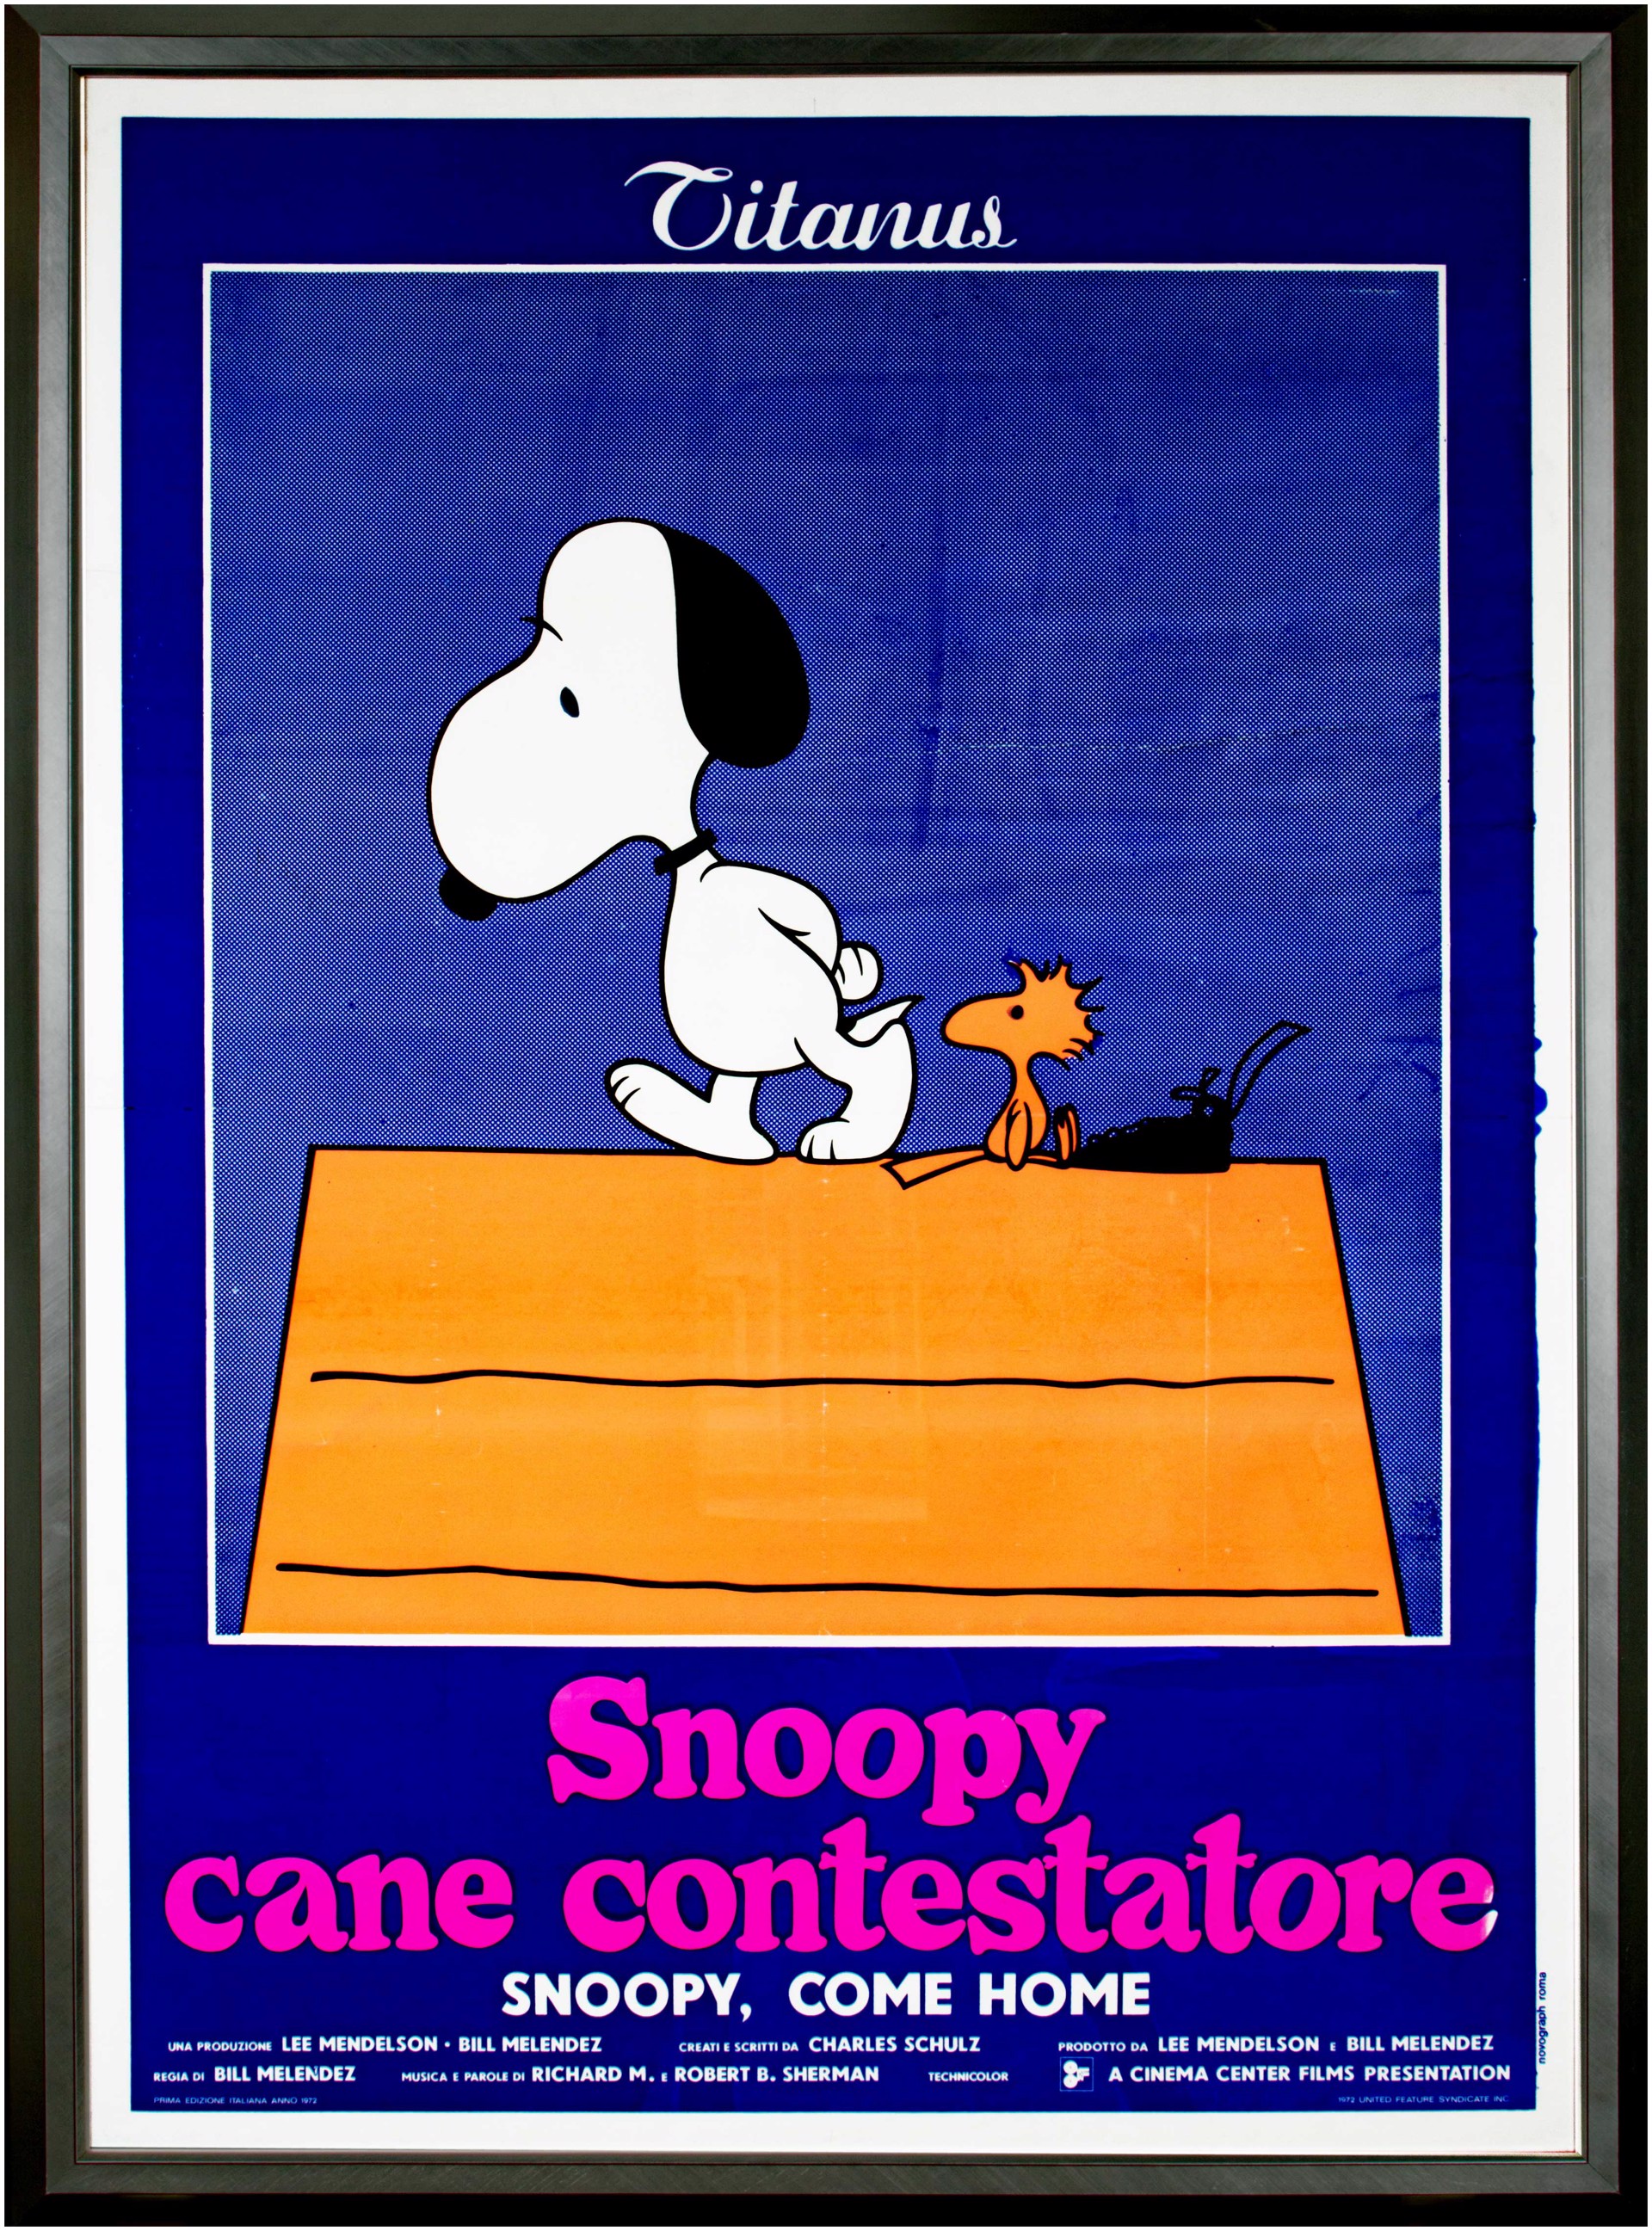 Snoopy Come Home by Charles Schulz